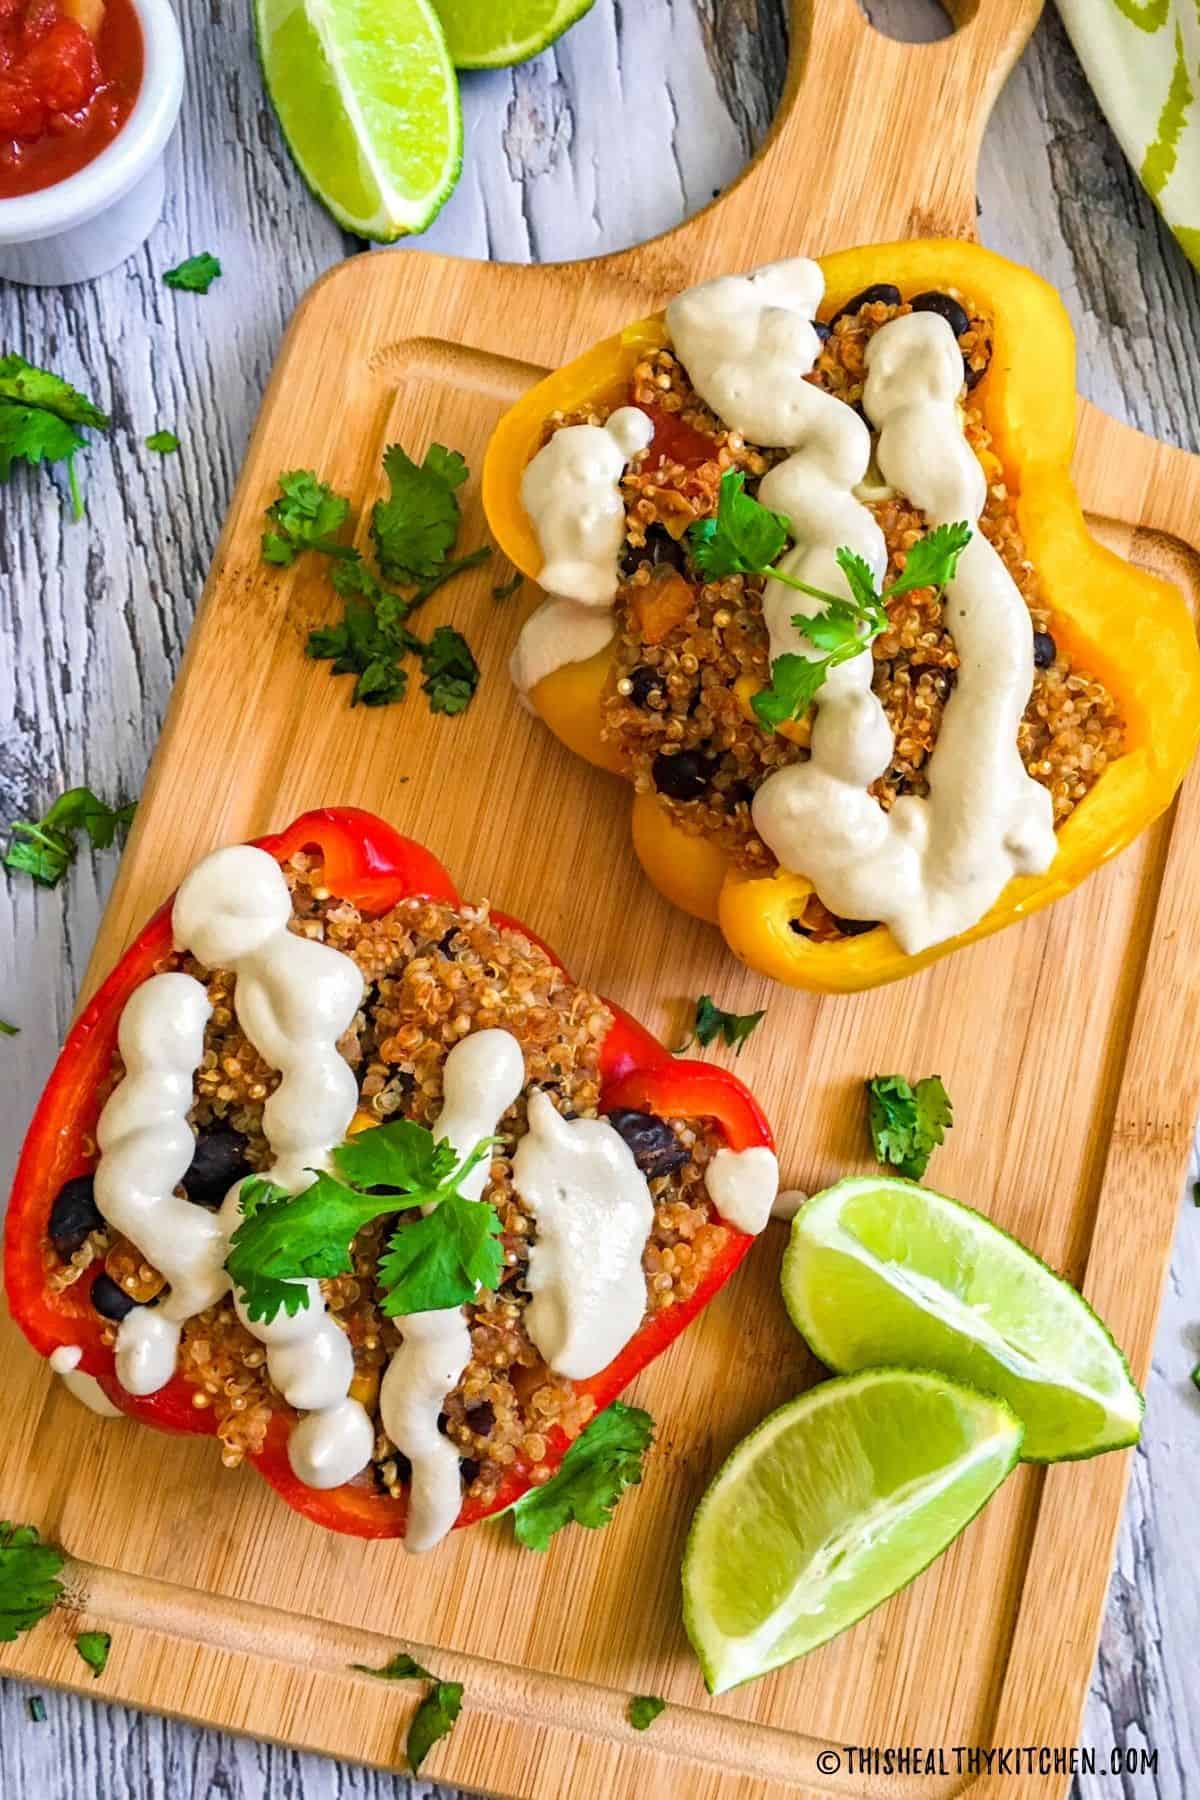 Bell pepper halves stuffed with quinoa, beans, corn and topped with cheese sauce.